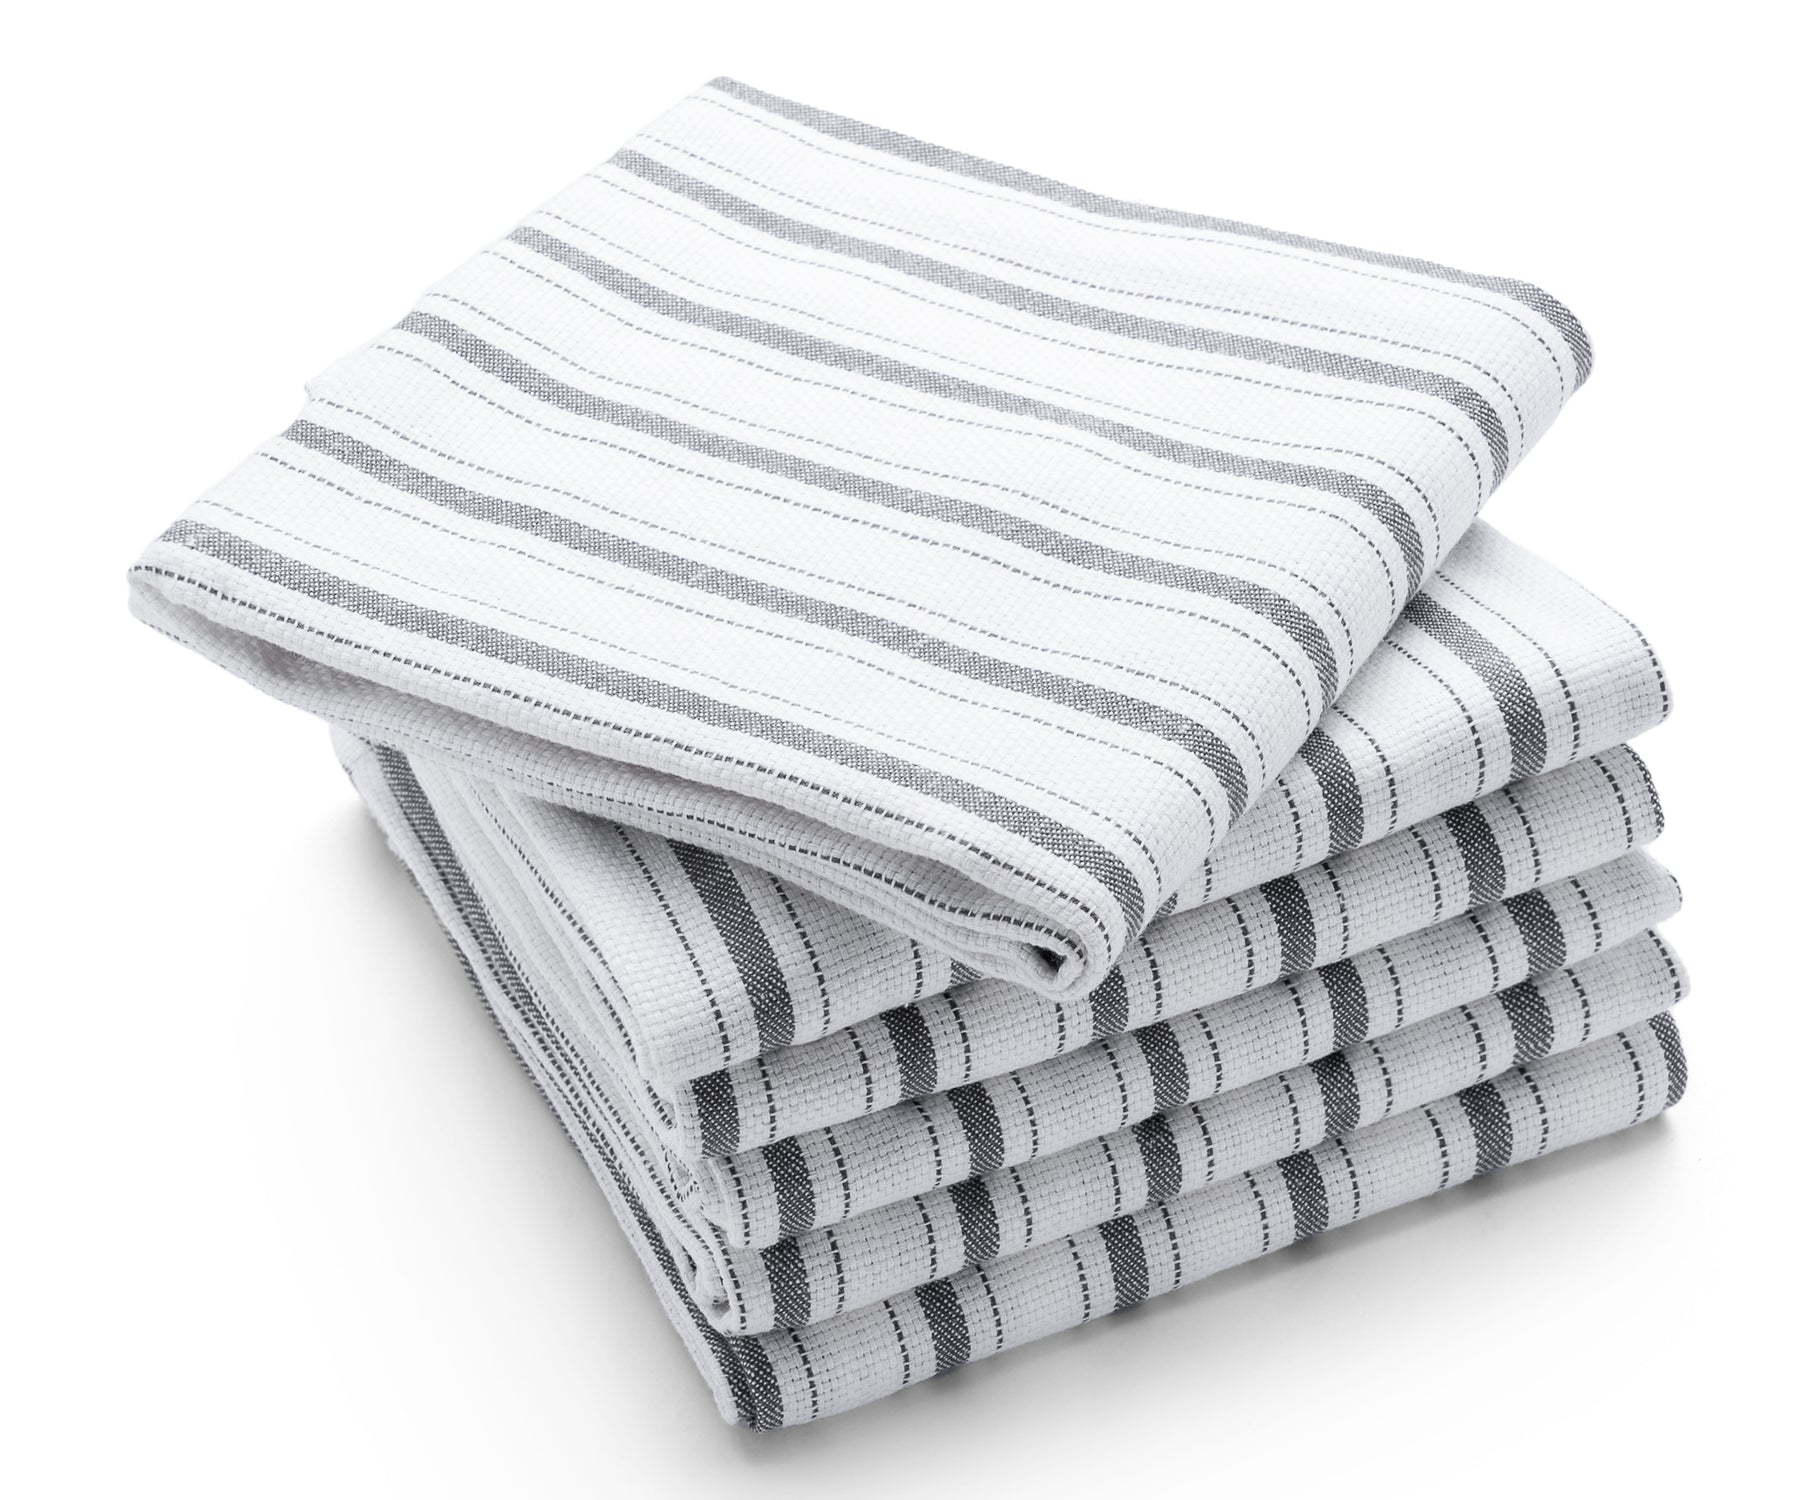 Buy Best Kitchen Towel Sets at Cheap Price